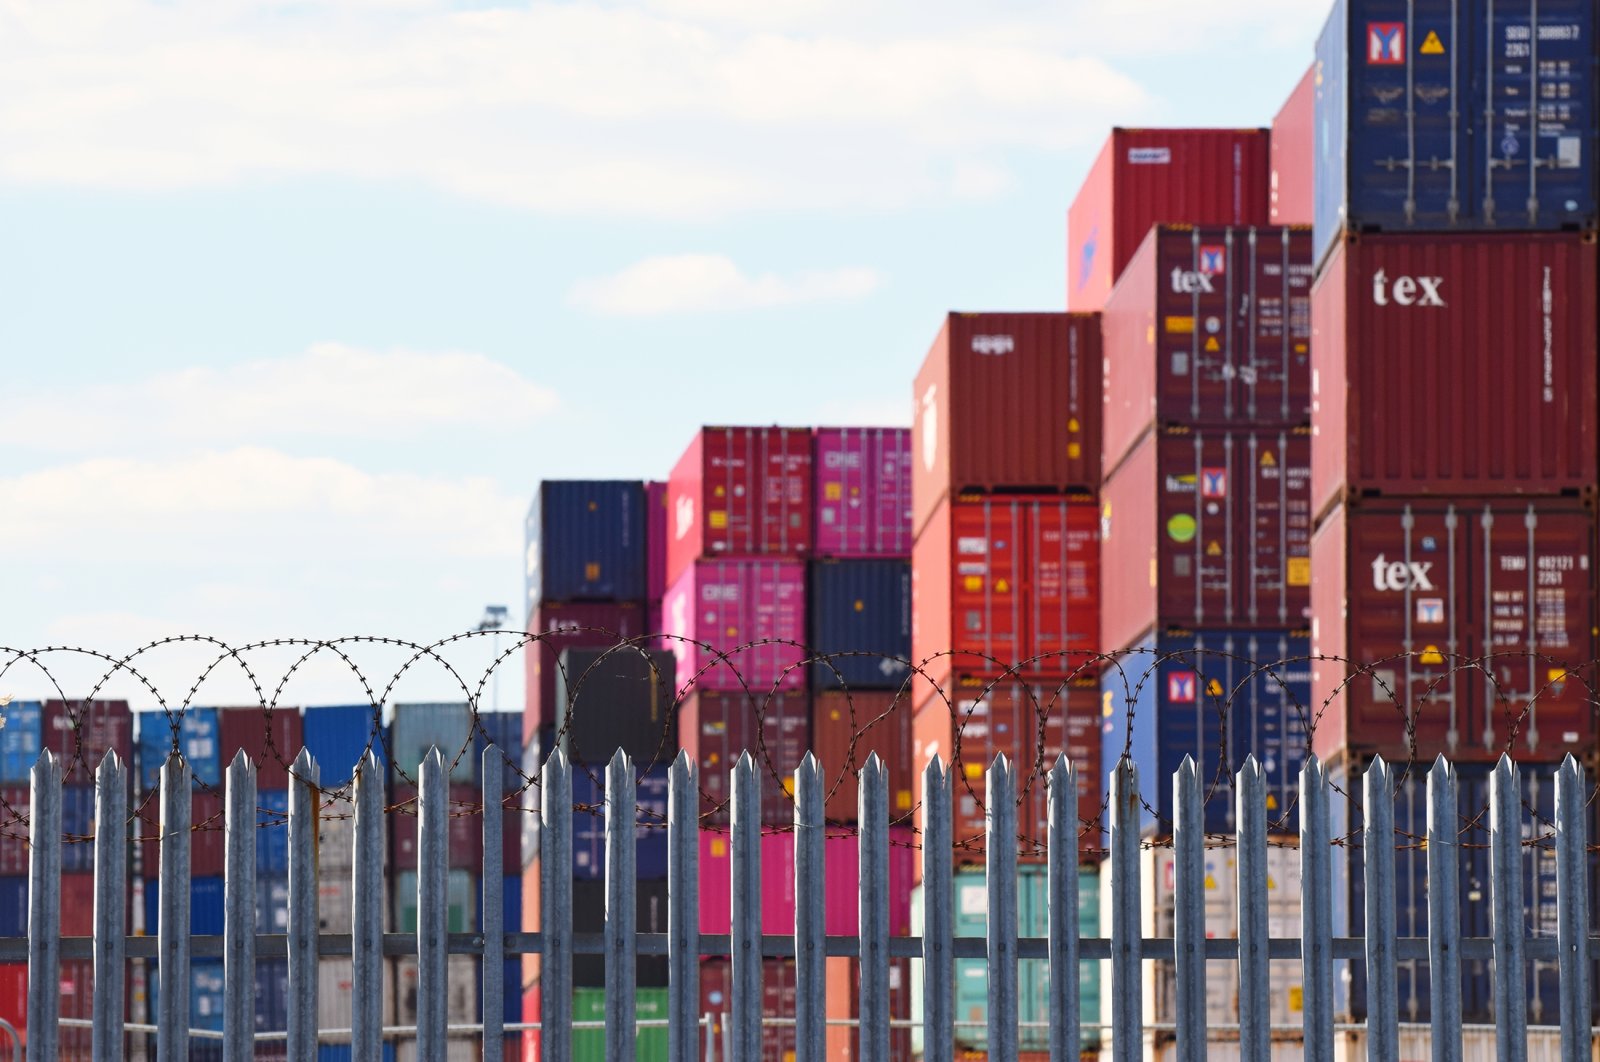 Freight shipping containers piled up high behind a fence topped with barbed wire in one of the U.K.'s busiest ports, Southampton, U.K., May 31, 2020. (Shutterstock Photo)